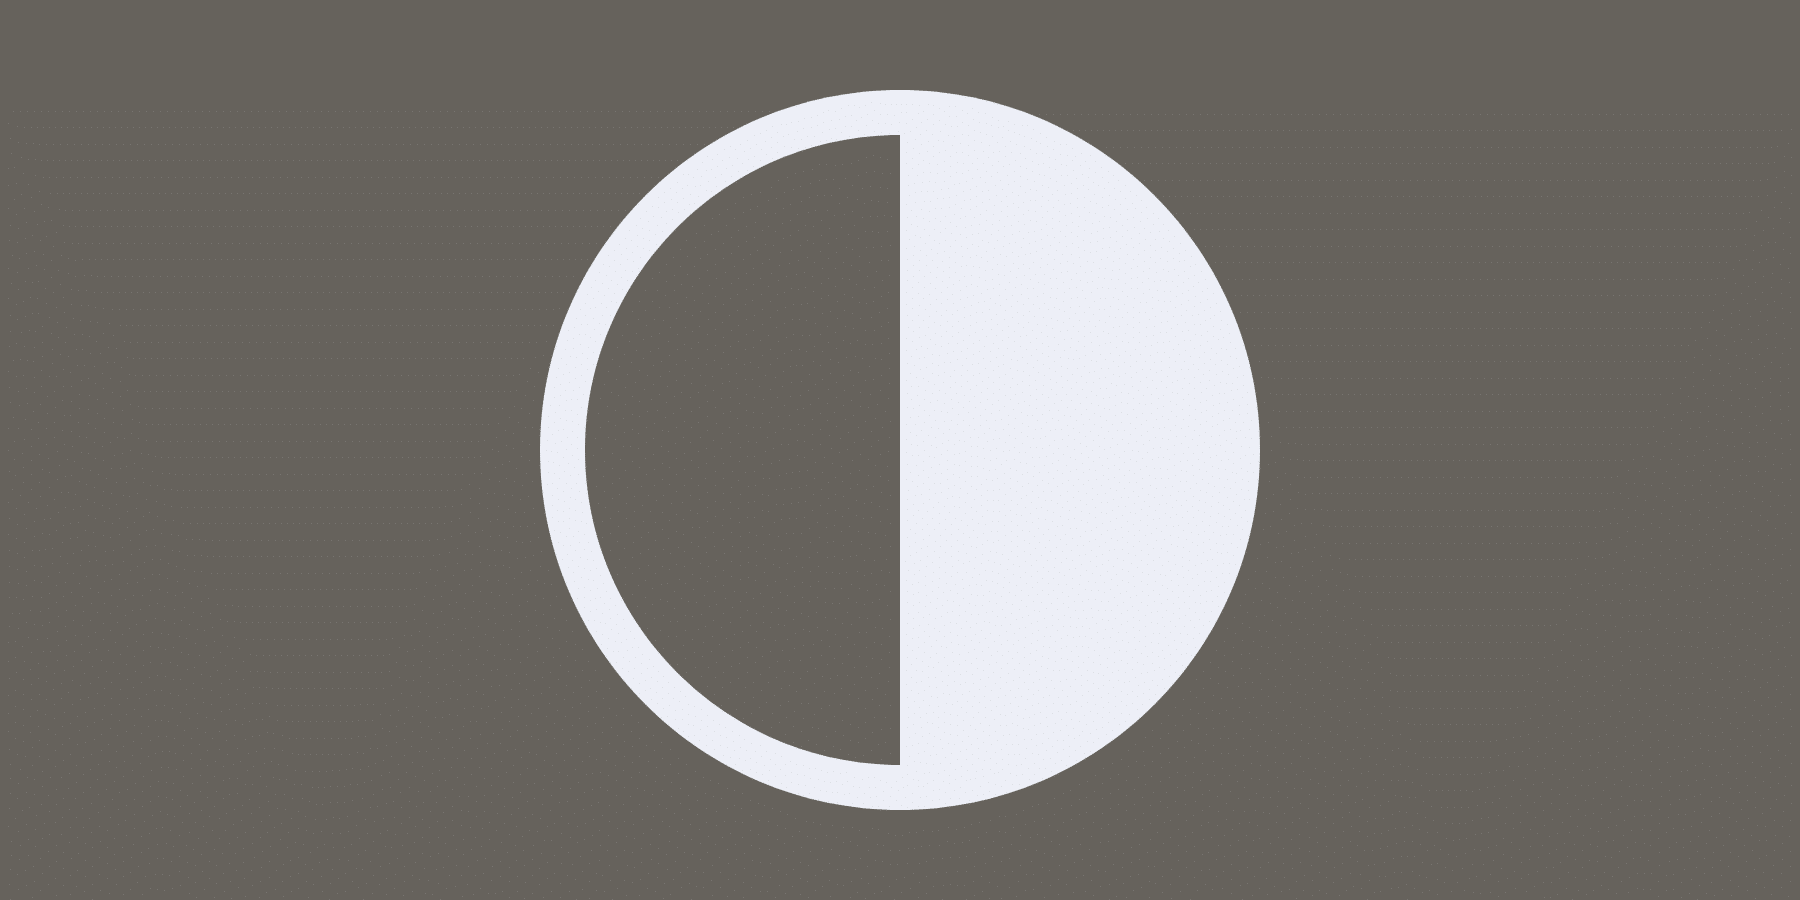 Mercury Flag - Flags of the Solar System Vexillology Project